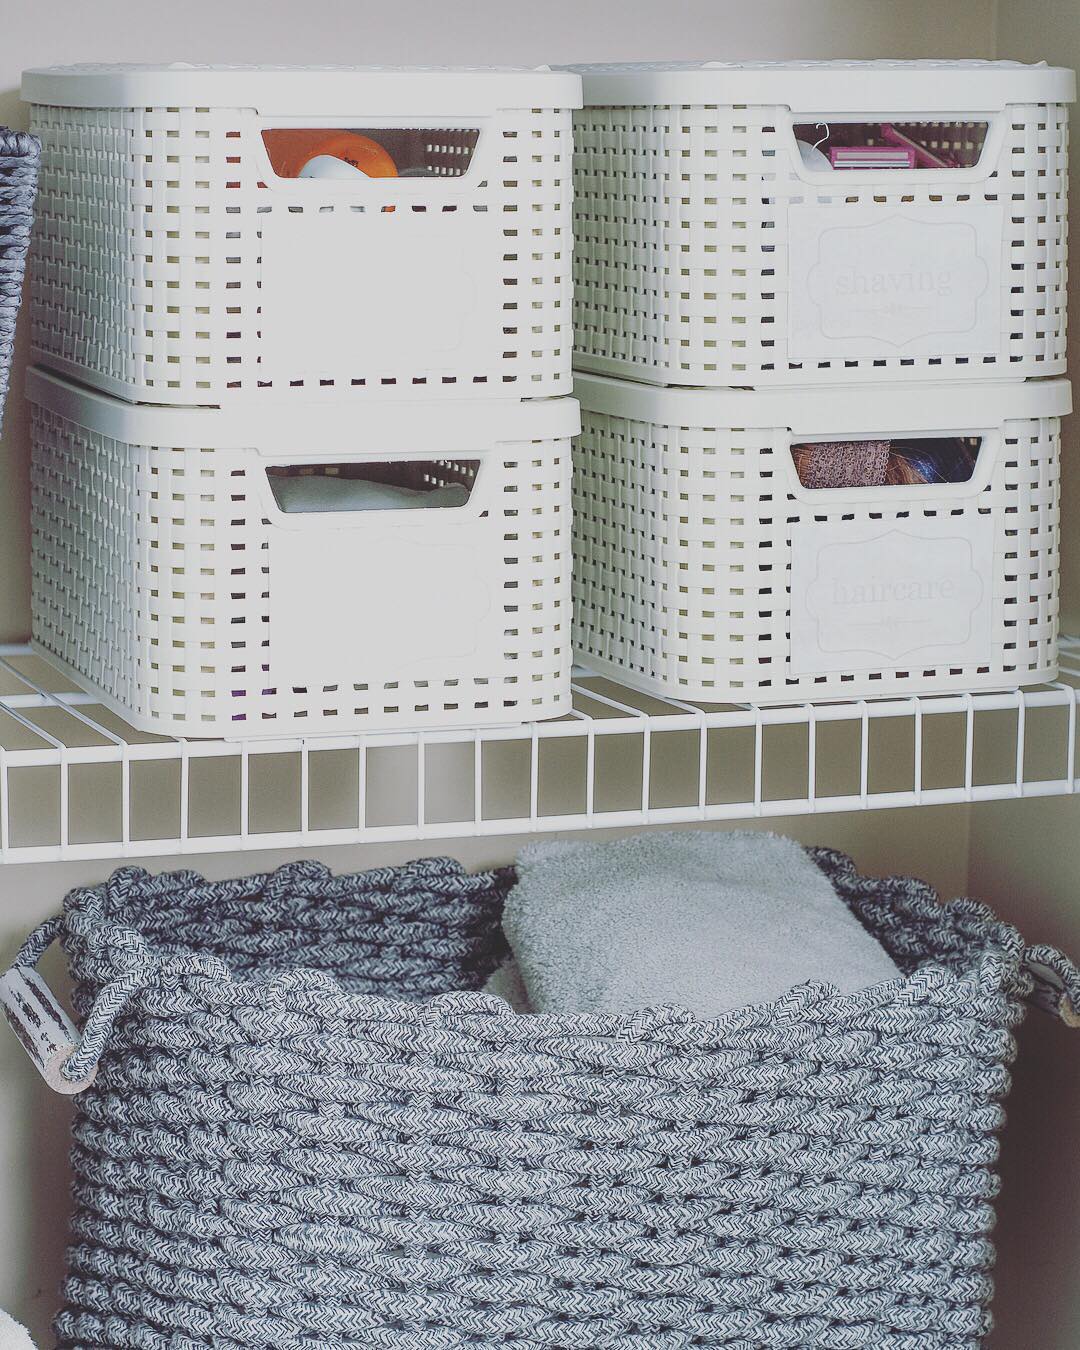 Plastic organizer totes on wire closet shelving. Photo by Instagram user @straightened_spaces